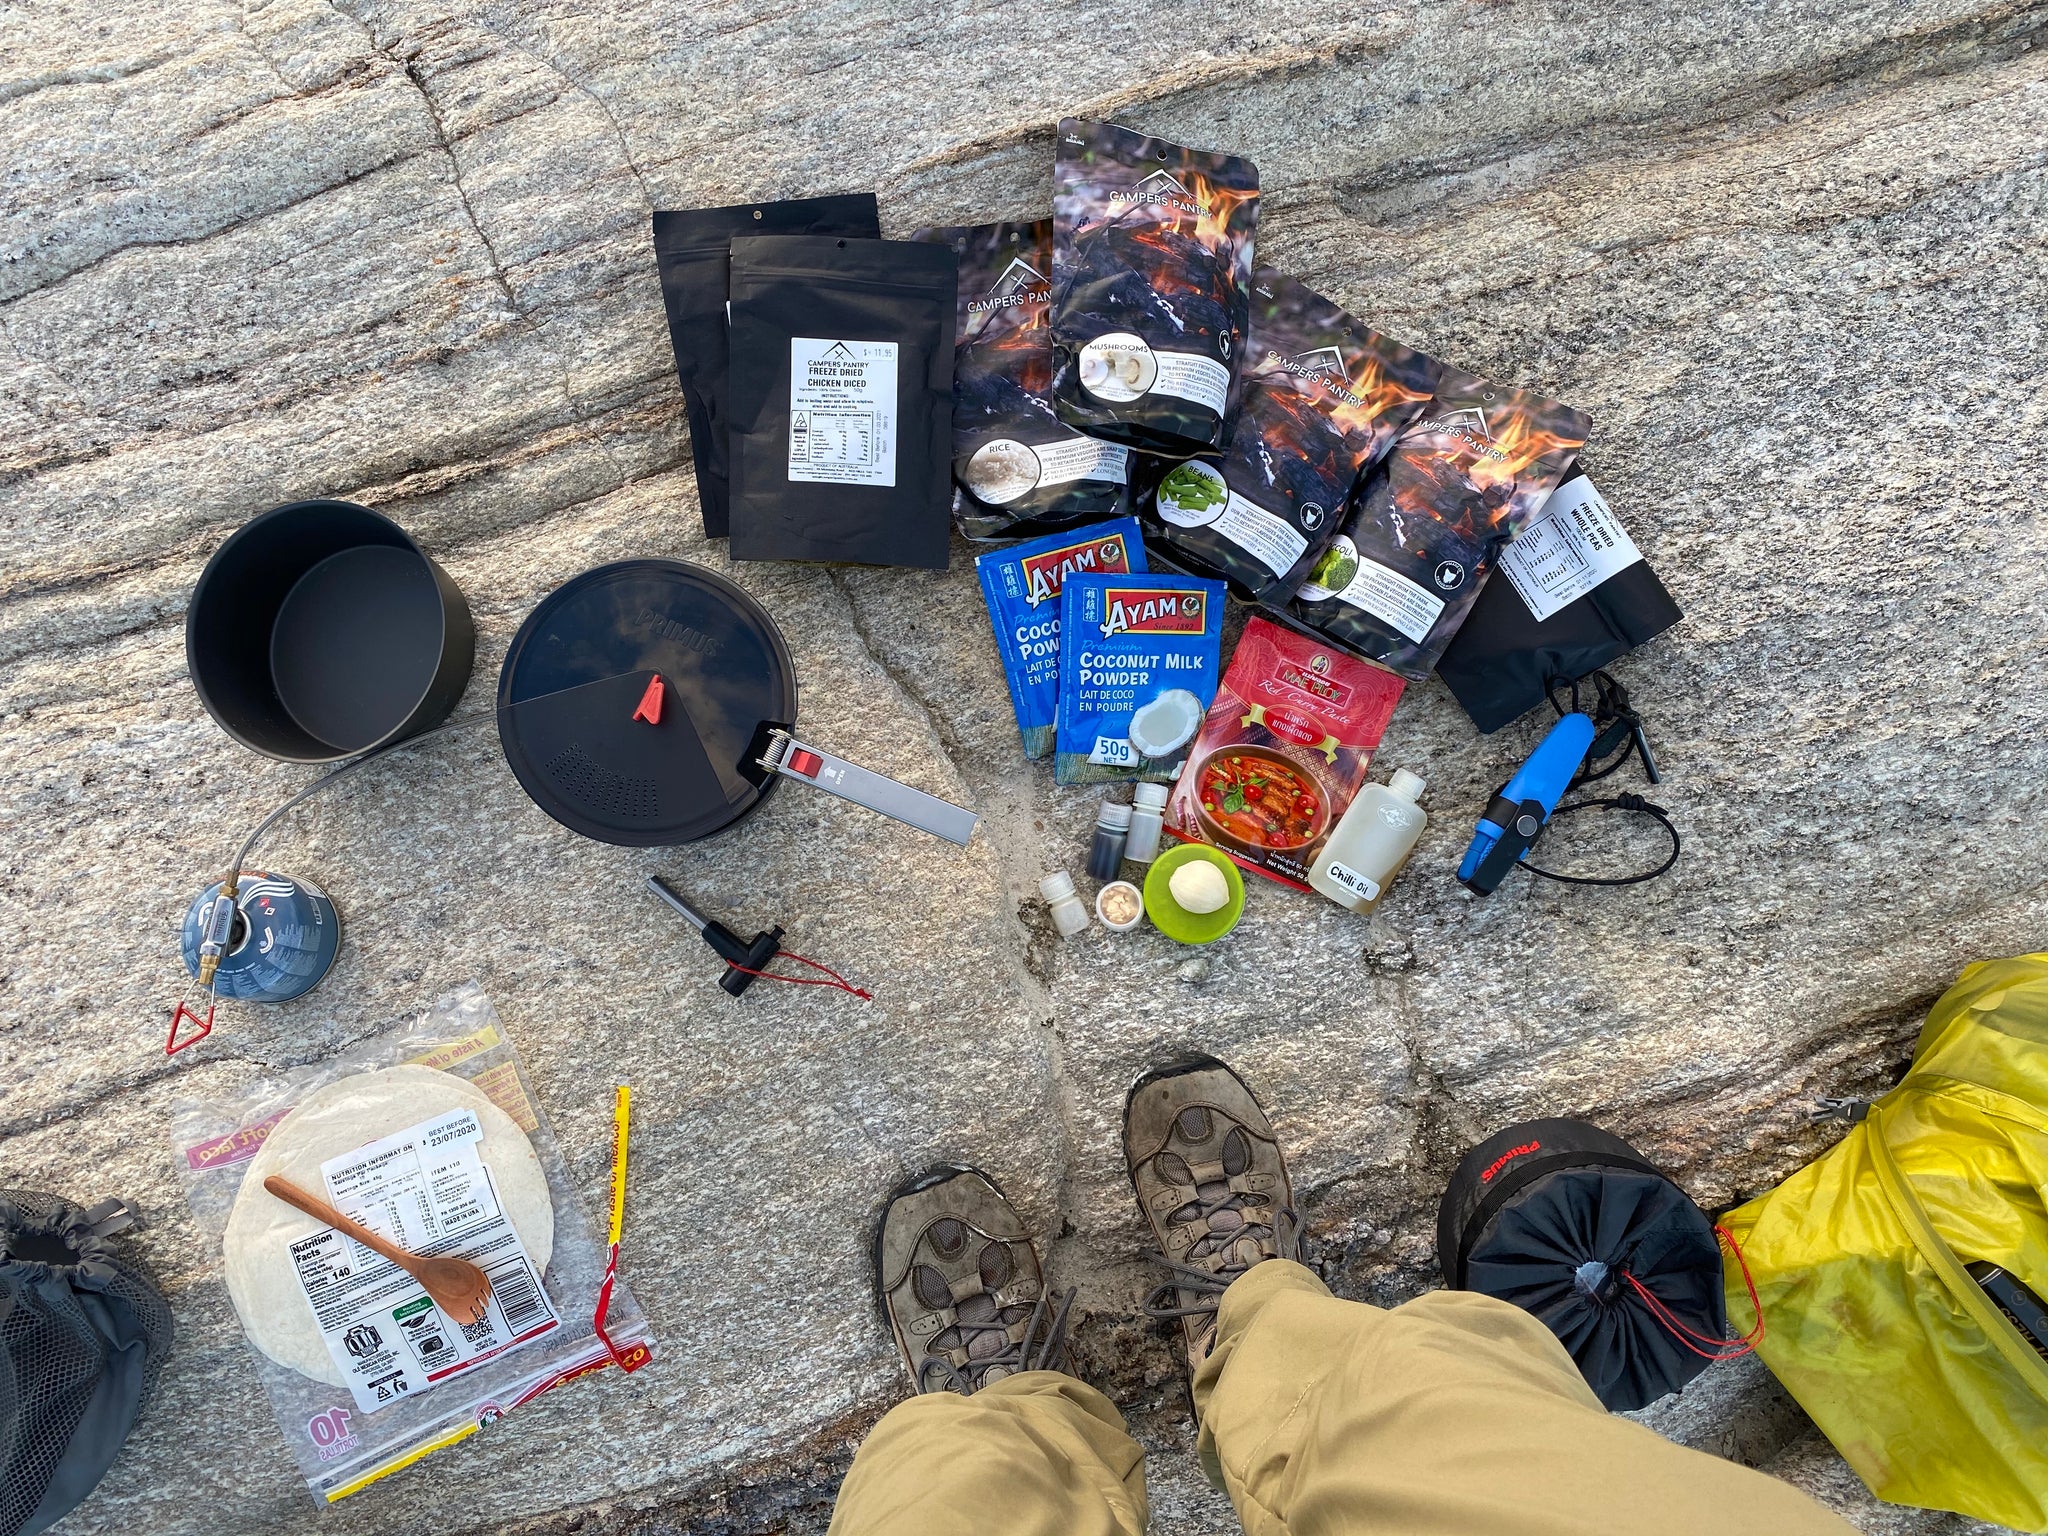 INGREDIENTS FOR CAMP COOKING